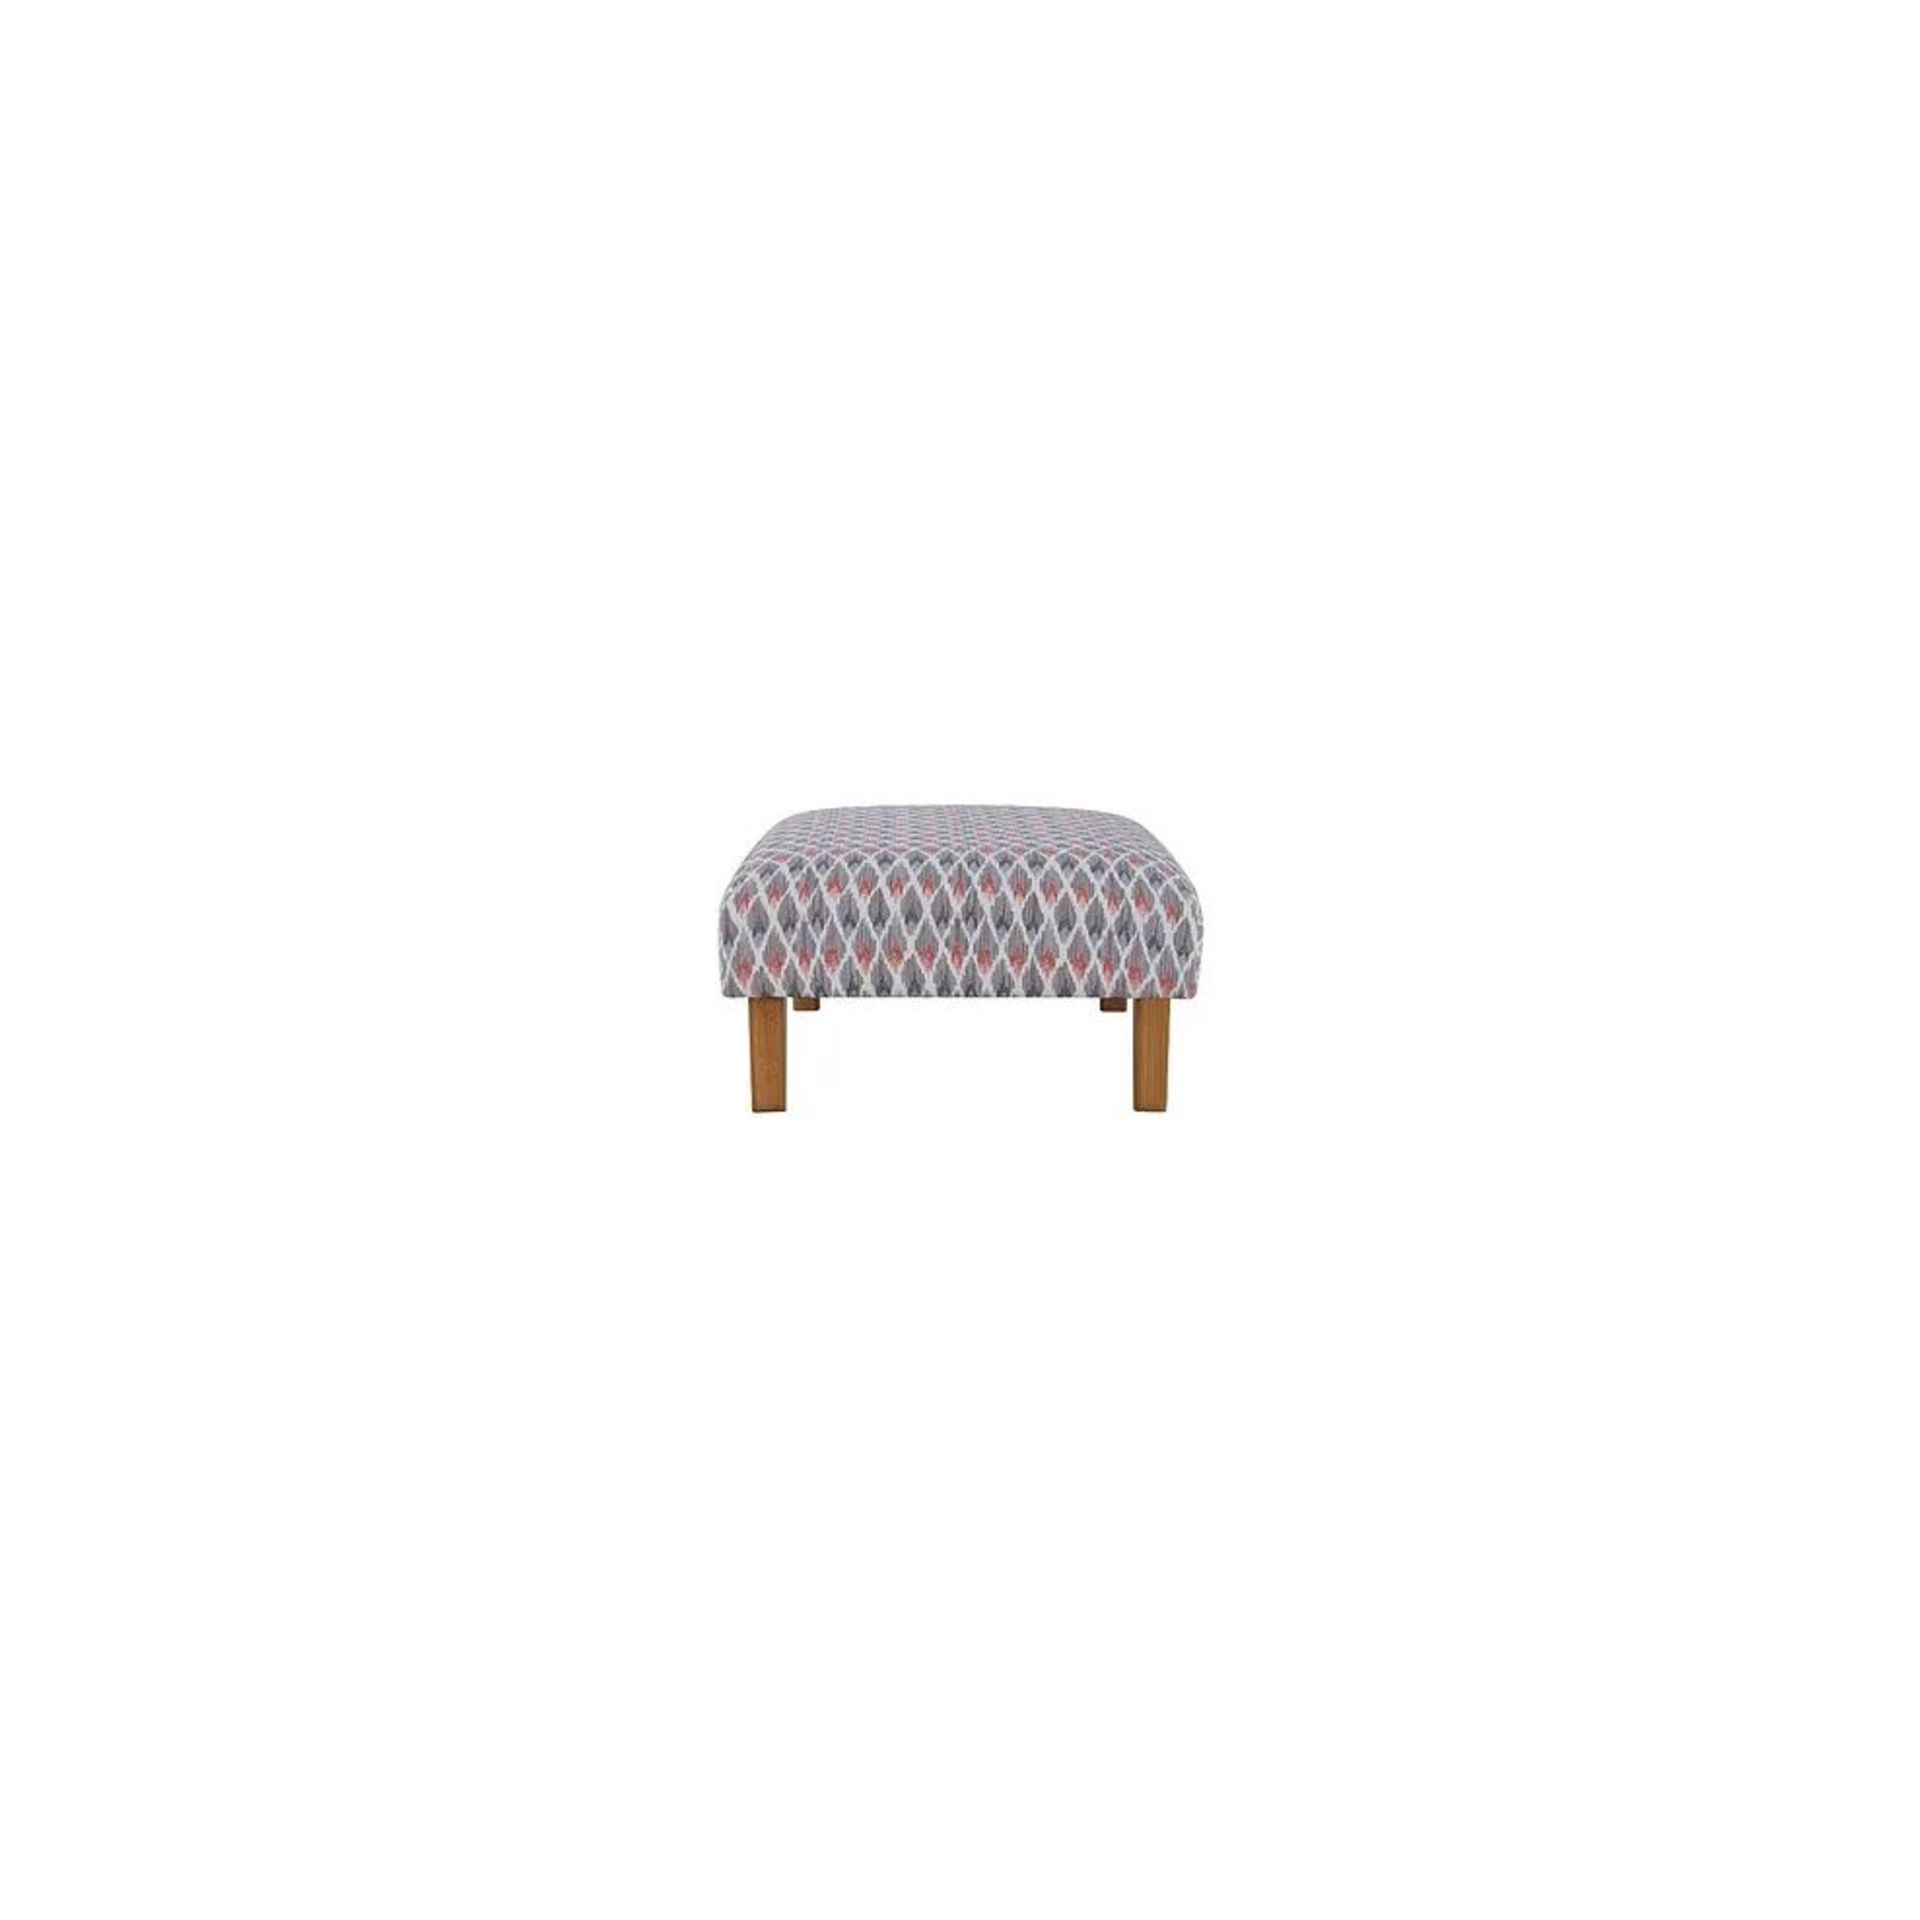 BRAND NEW JASMINE Footstool - NEWTON CORAL FABRIC. RRP £349. Built with a sturdy hardwood frame - Image 3 of 5